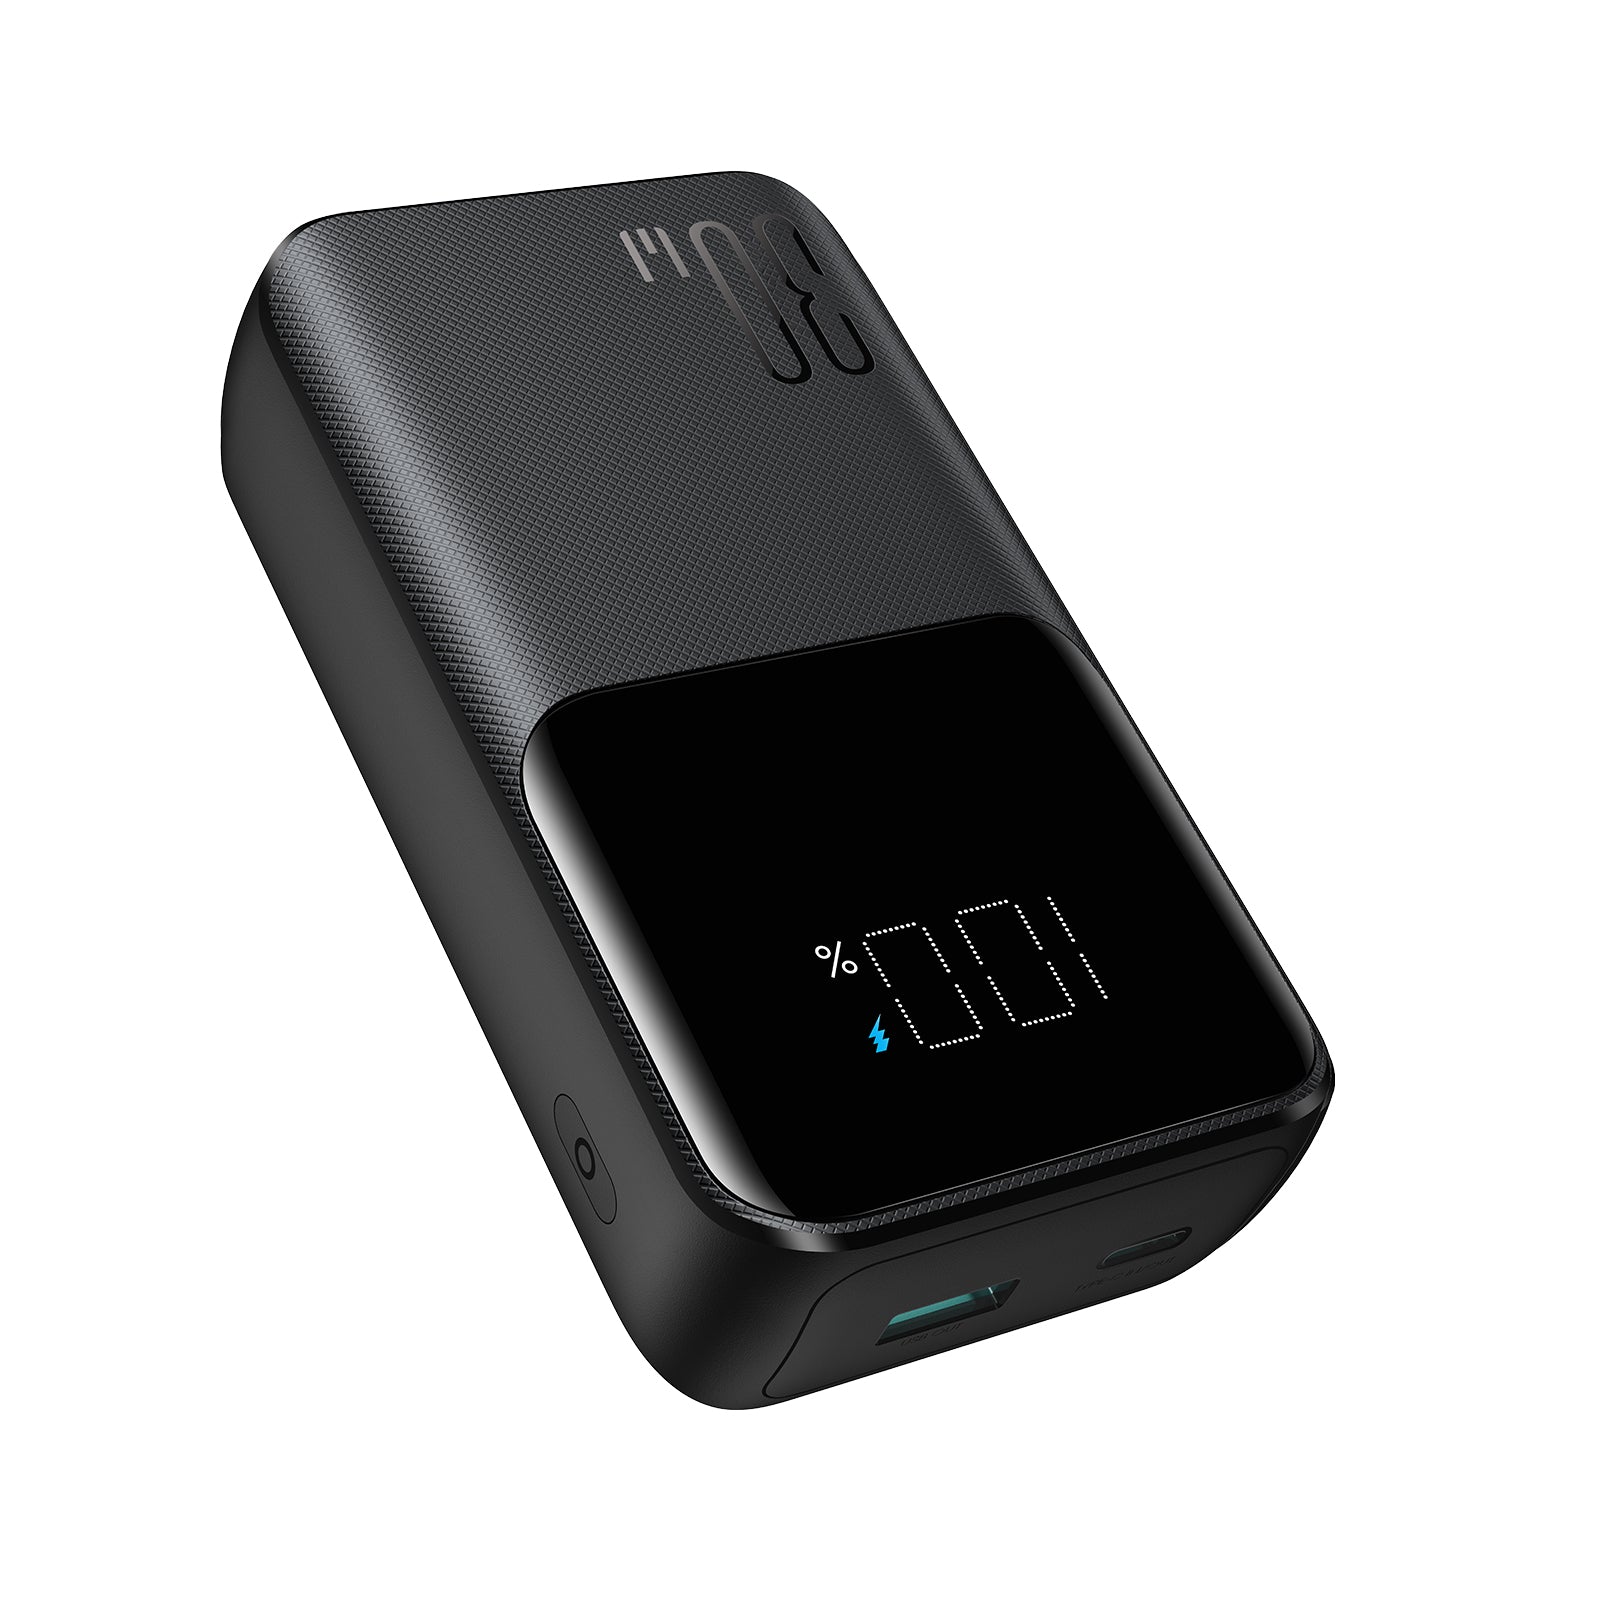 Anker Power Bank (20,000 mAh, 22.5W, Built-in USB-C Cable) now available  globally -  News